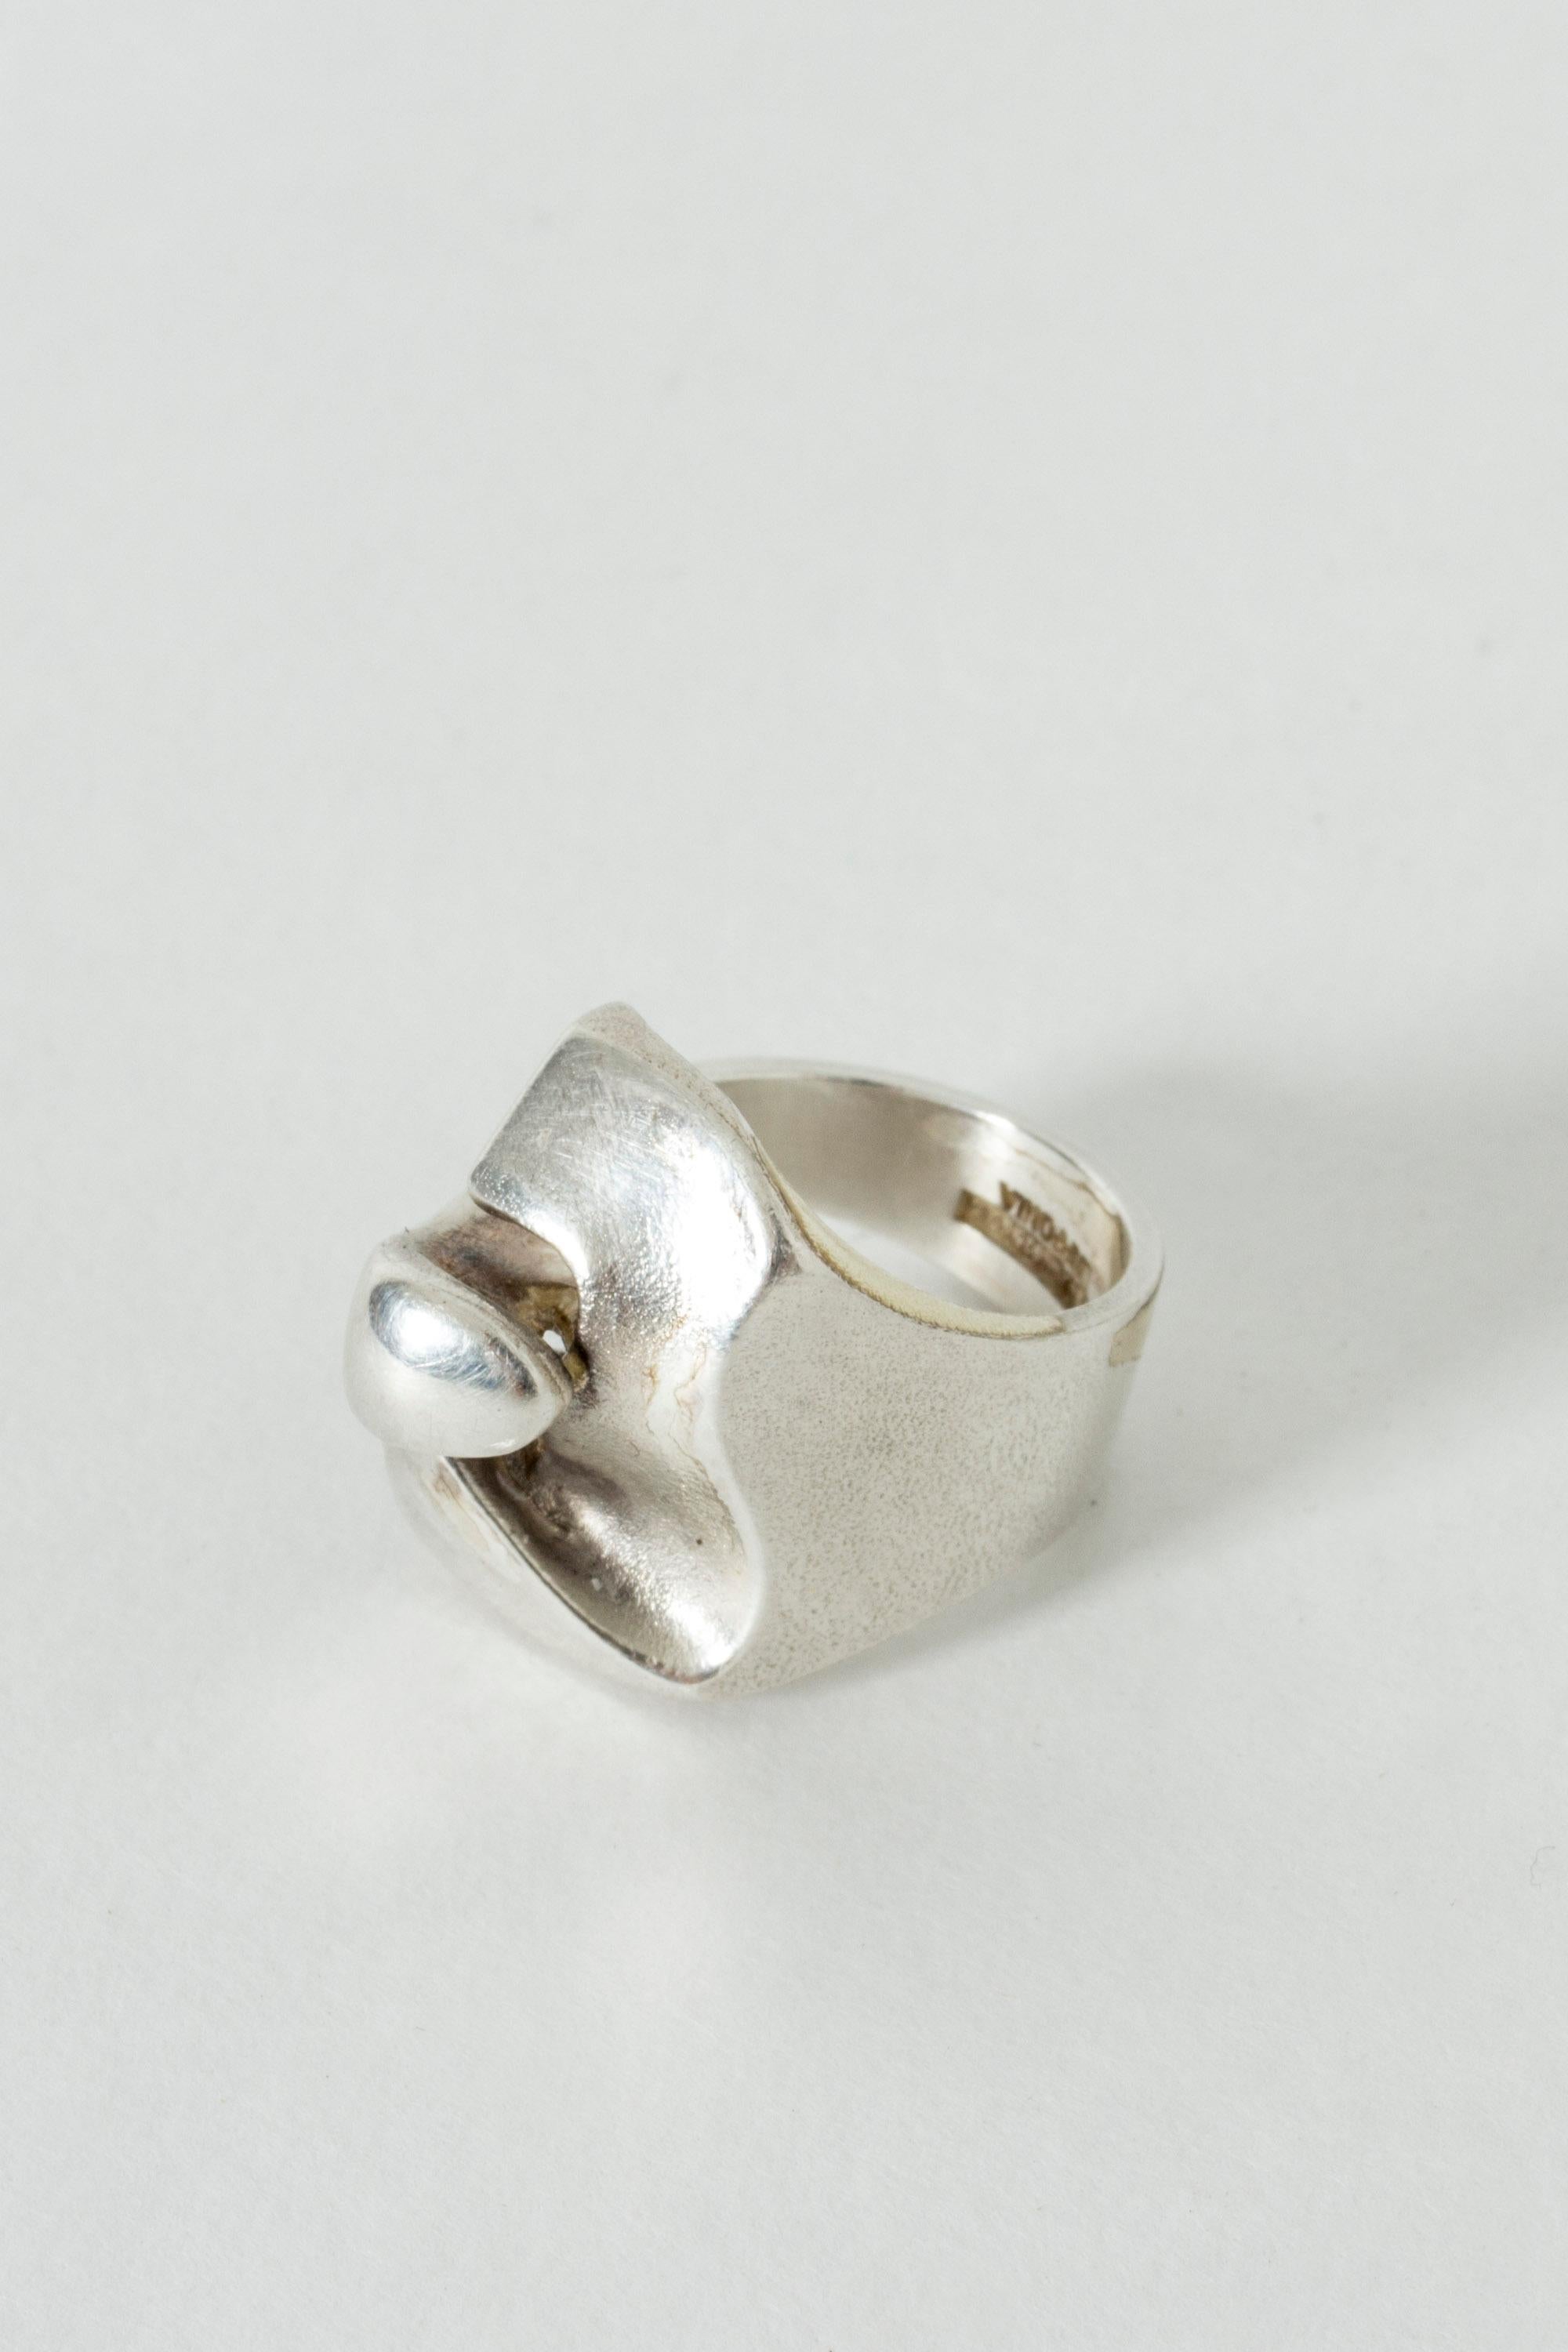 Cool silver ring by Björn Weckström in an interesting, enigmatic design. Brushed surface.